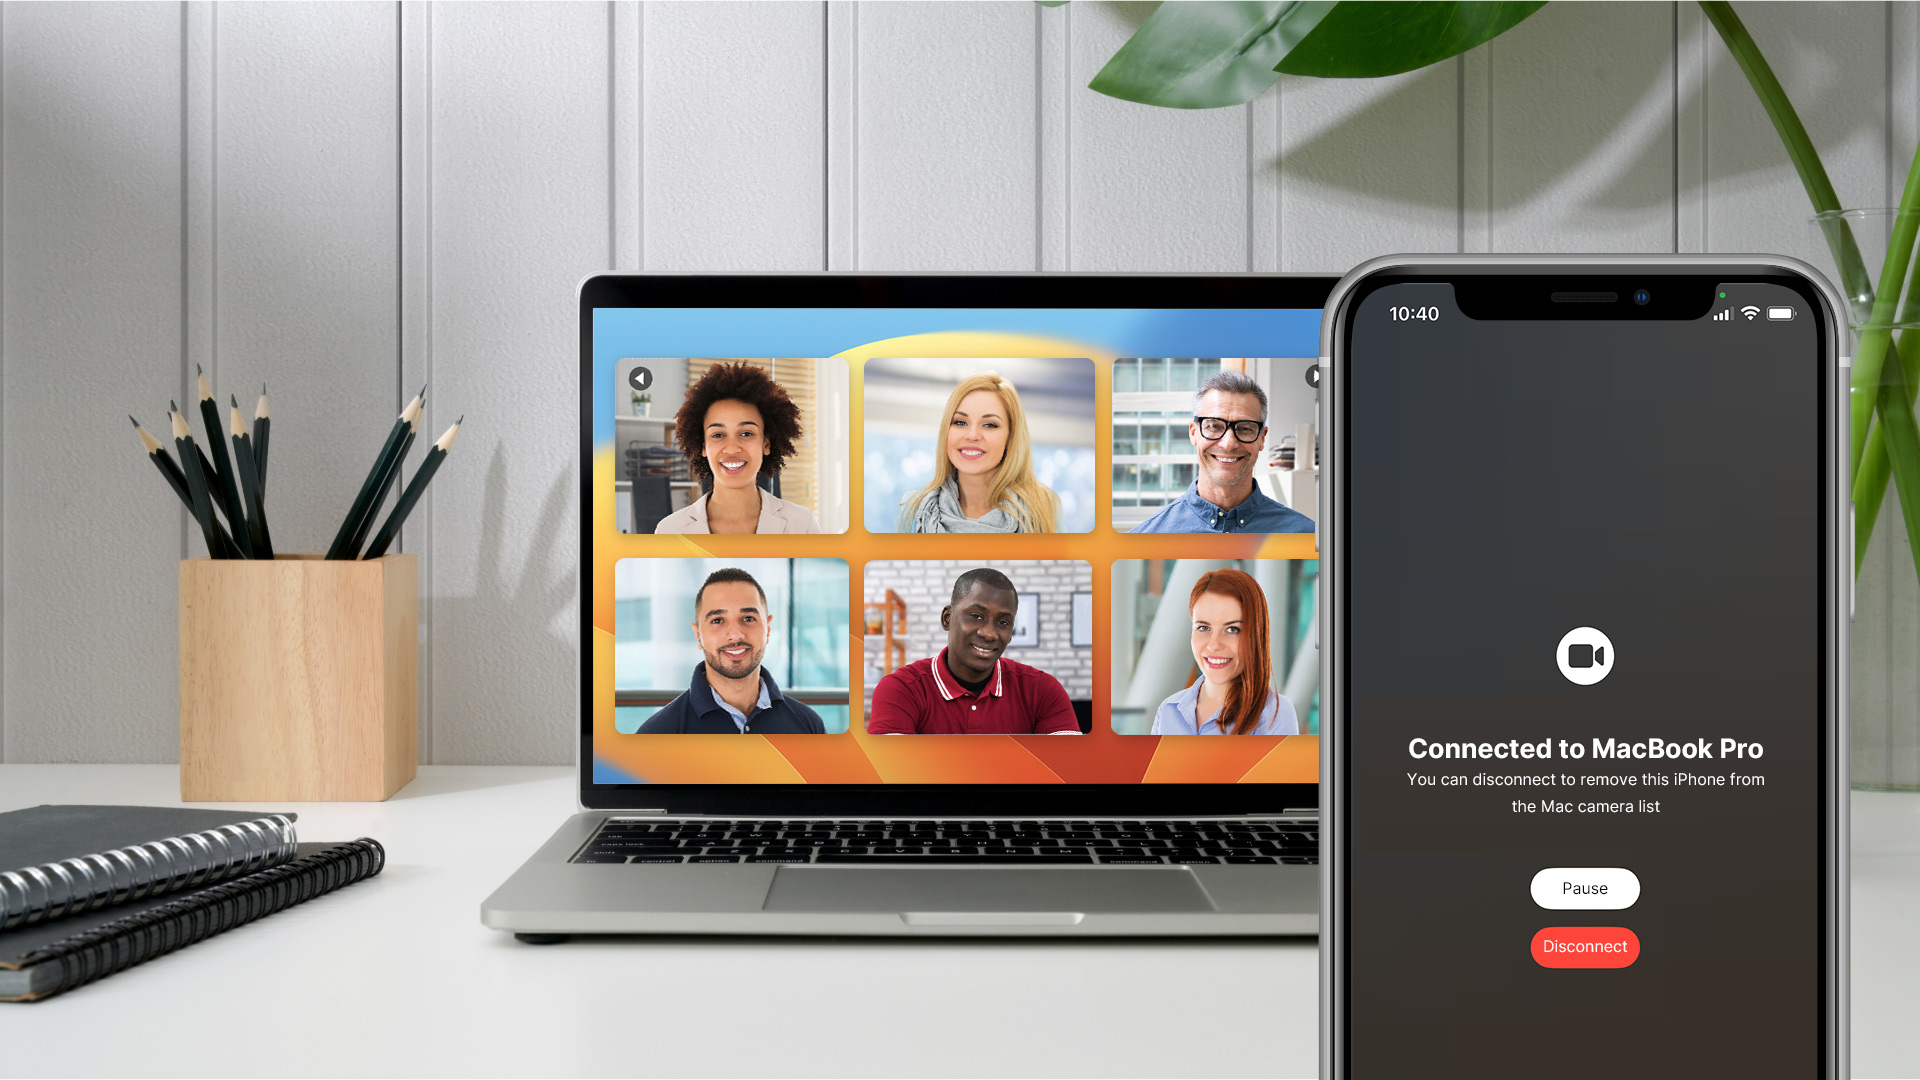 Best Webcam for Video Calls: The iPhone as of iOS 16